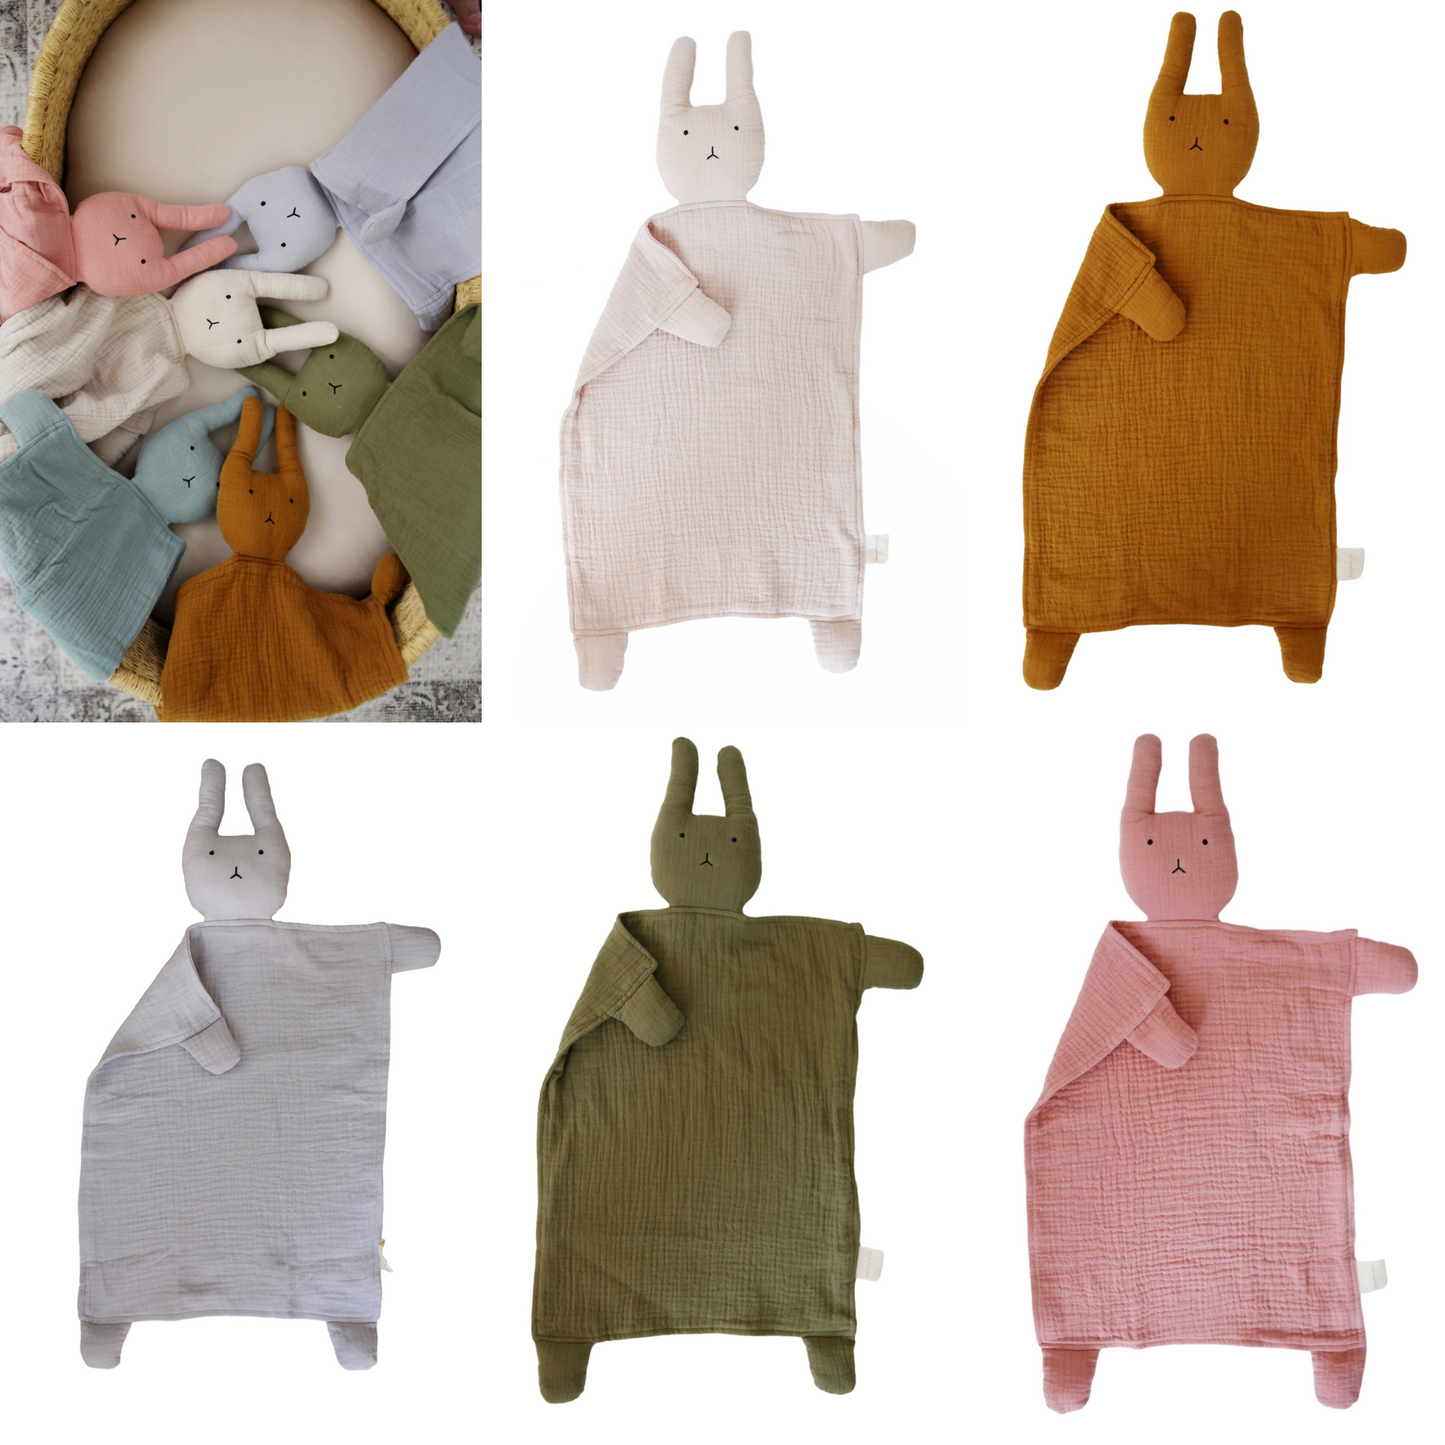 Marlowe & Co - Bunny Lovey Blanket in Assorted Colors